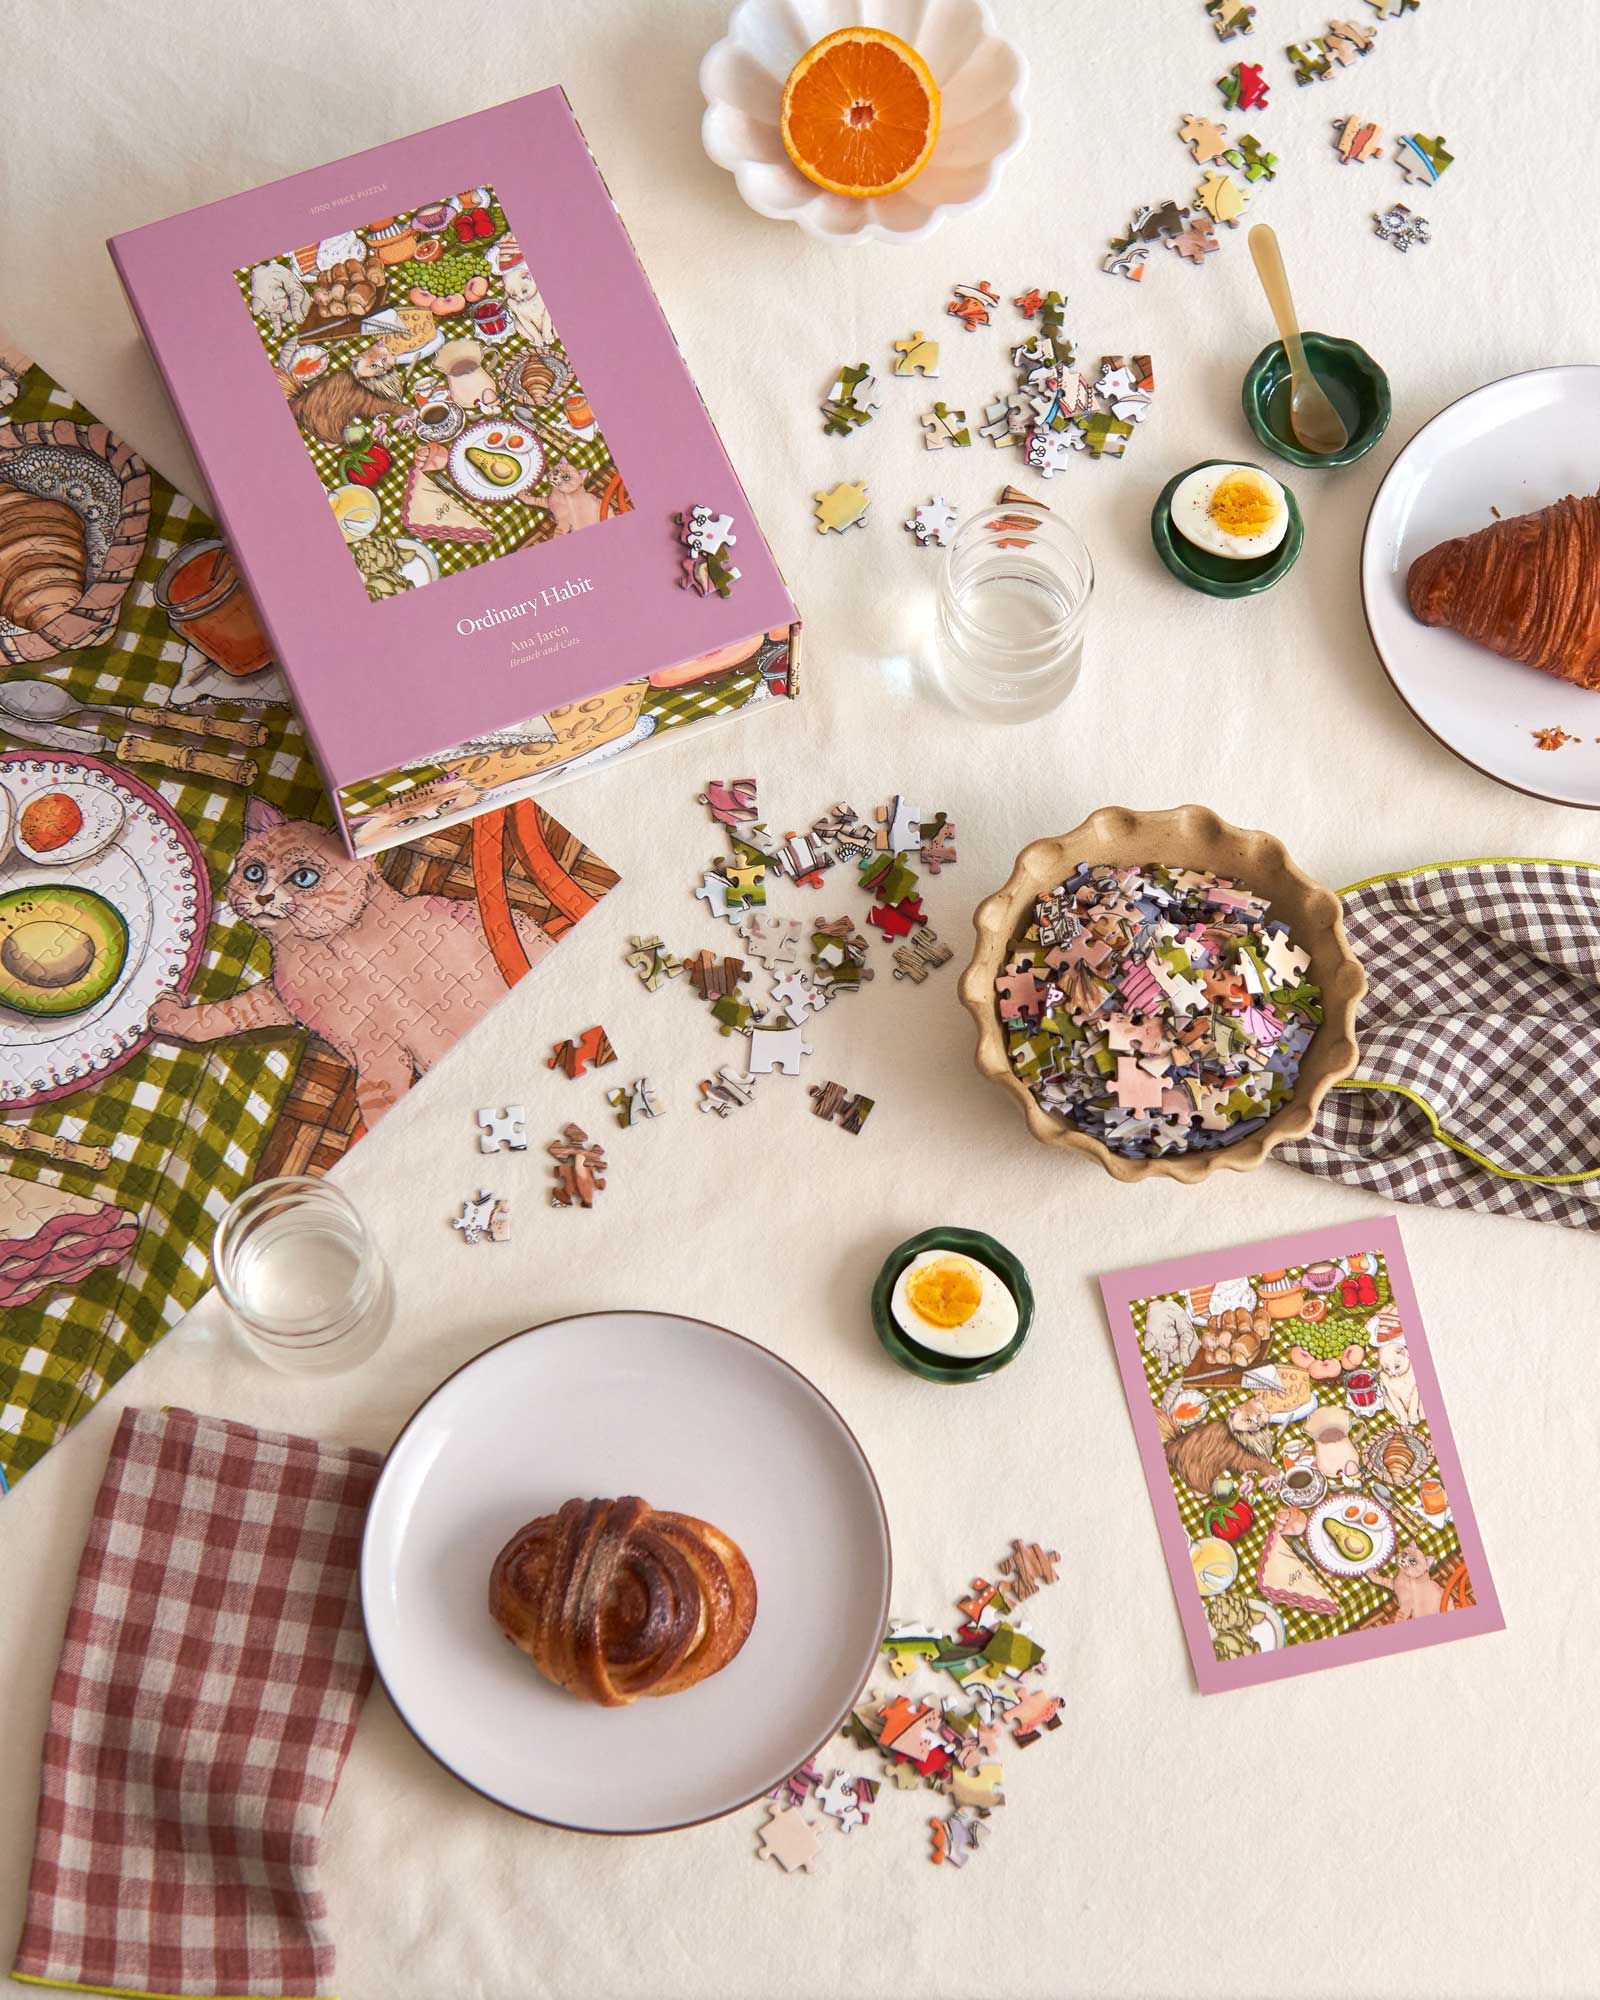 Brunch and Cats Puzzle by Ana Jaren - Ordinary Habit